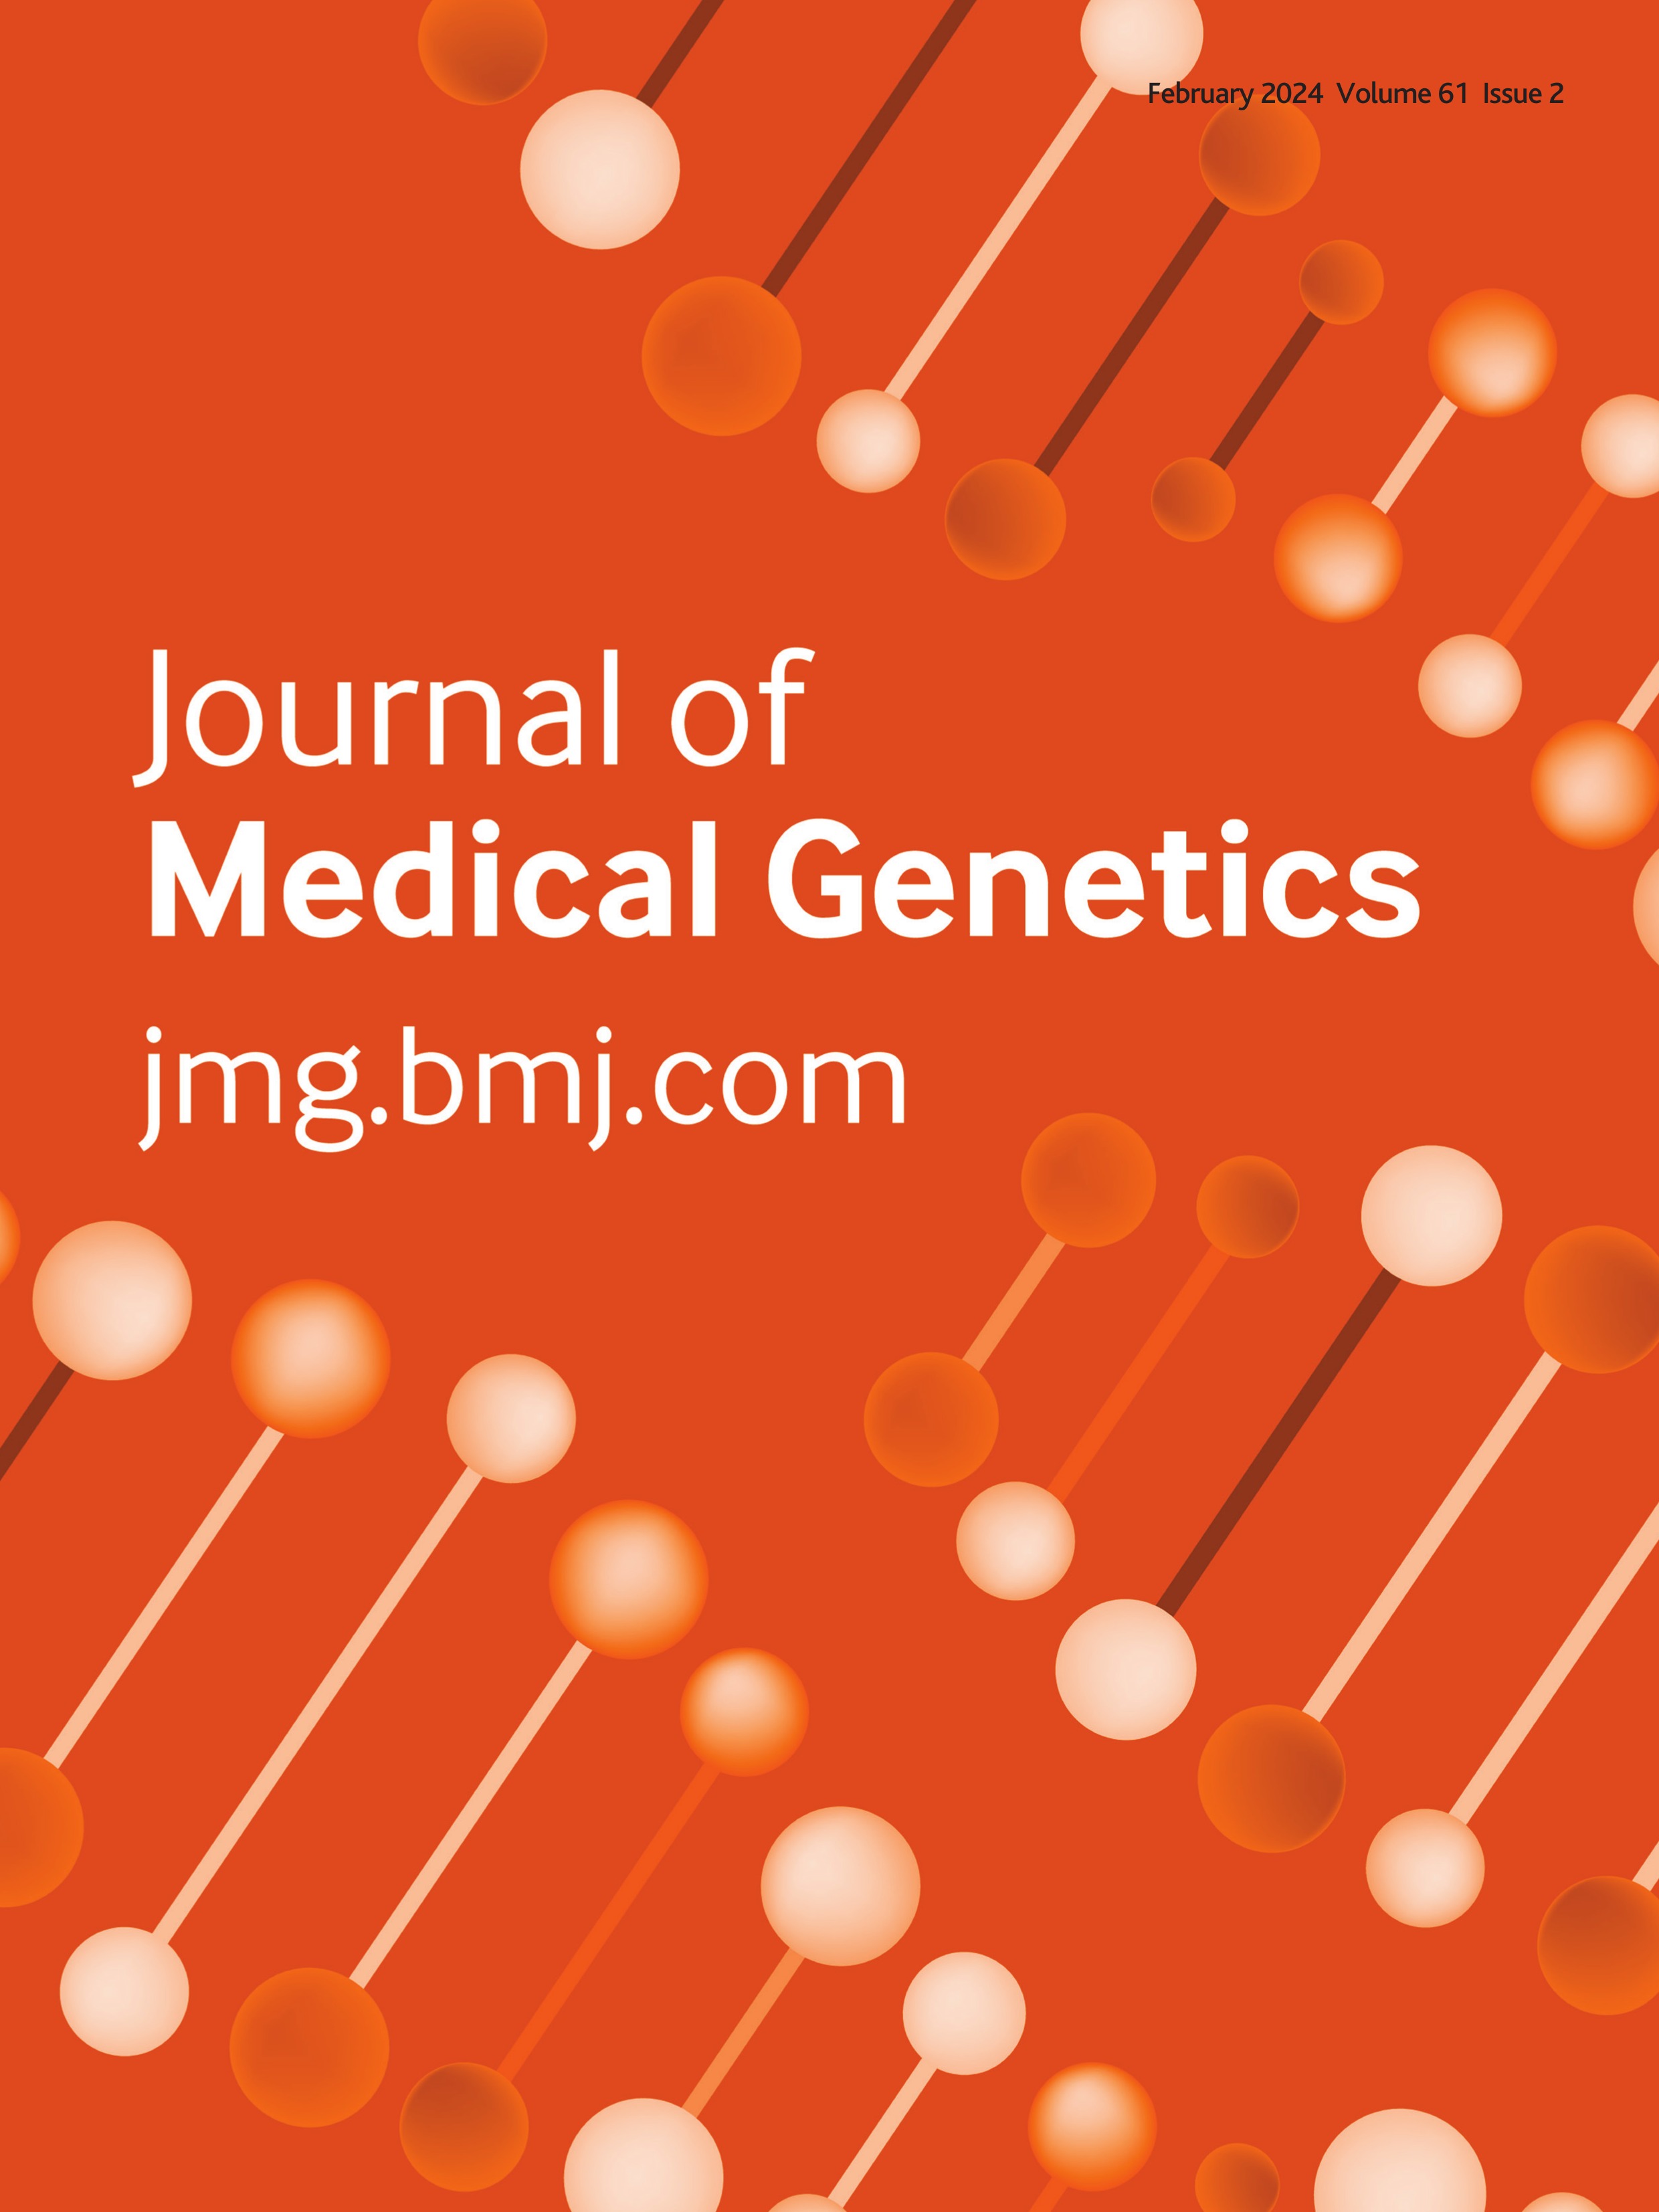 Evidence of a genetic background predisposing to complex regional pain syndrome type 1